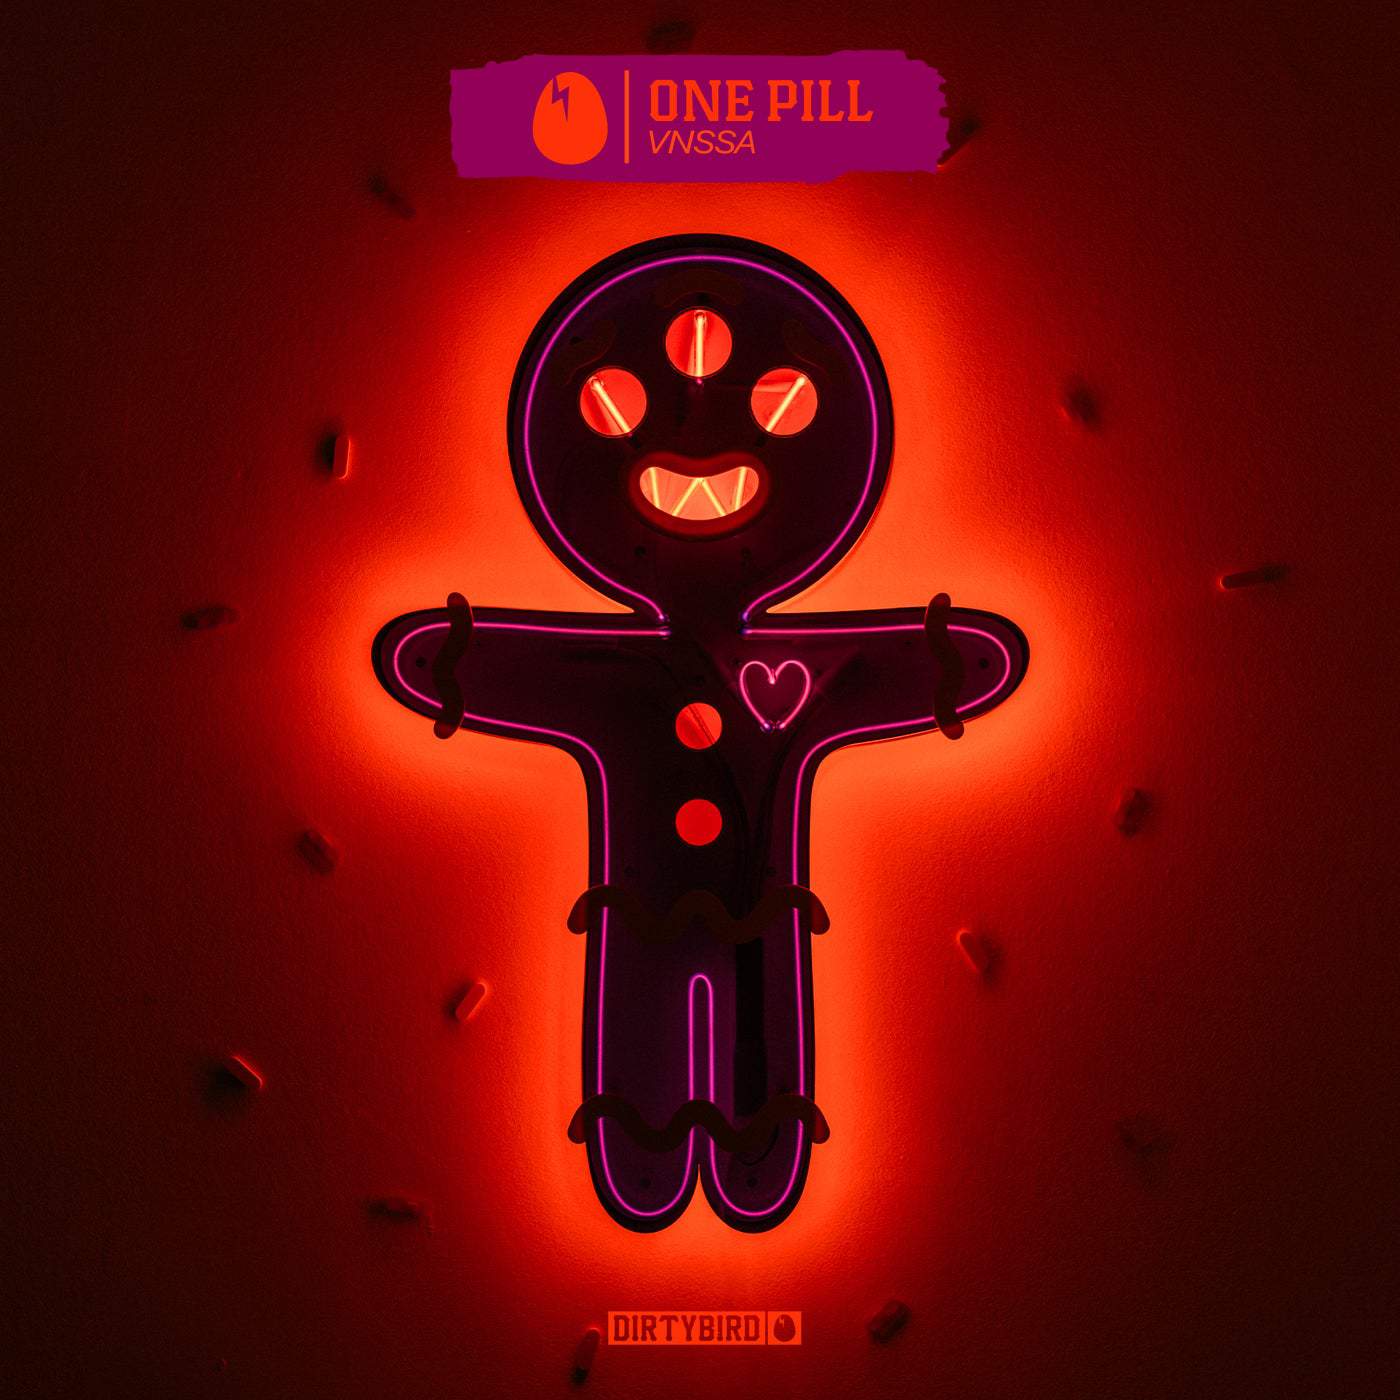 image cover: One Pill by VNSSA on DIRTYBIRD